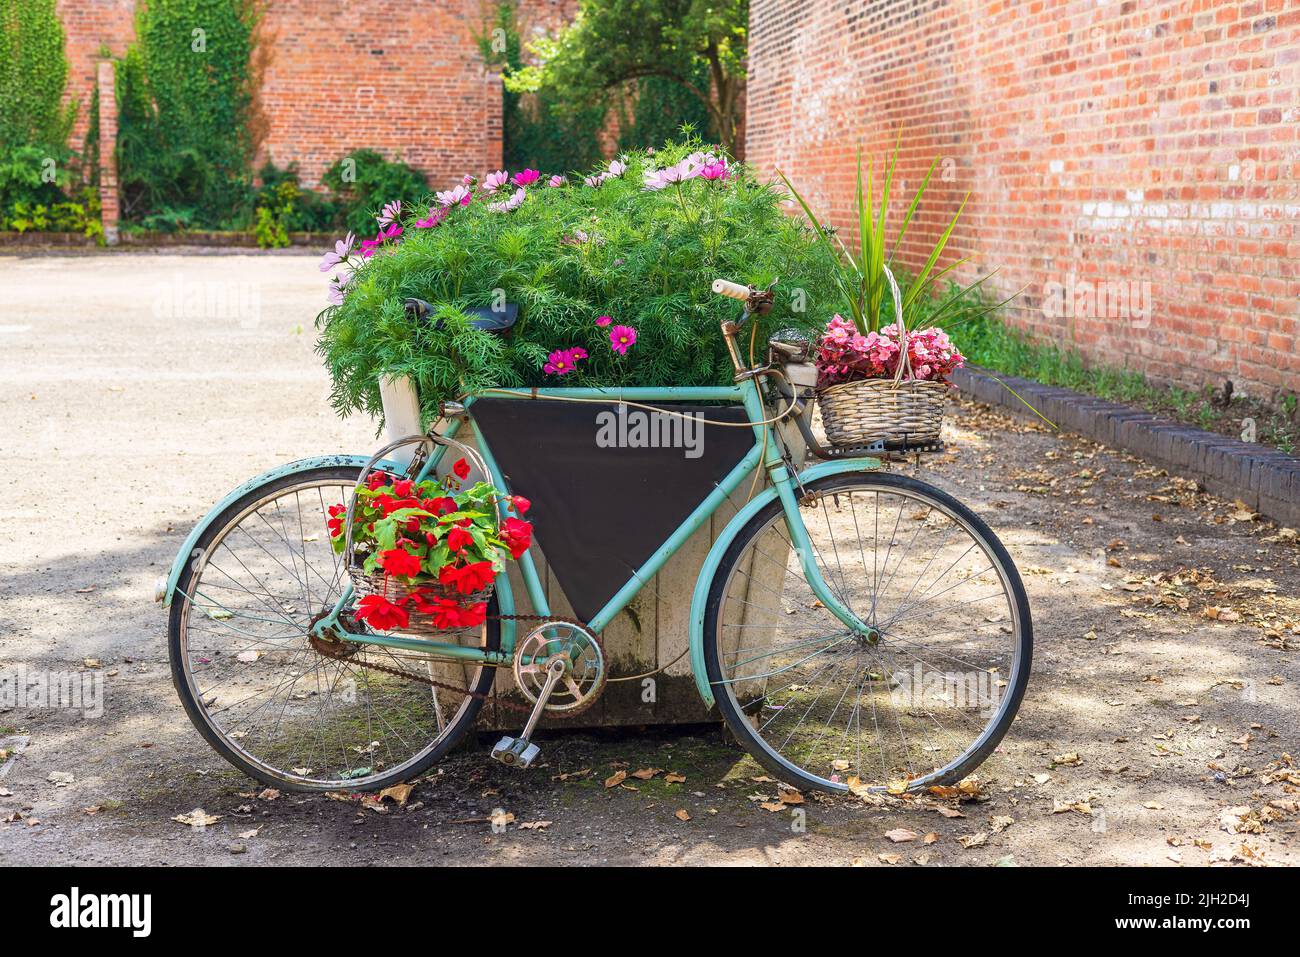 Old bicycle with baskets of flowers leaning against large container with Cosmos flowering plants. Stock Photo